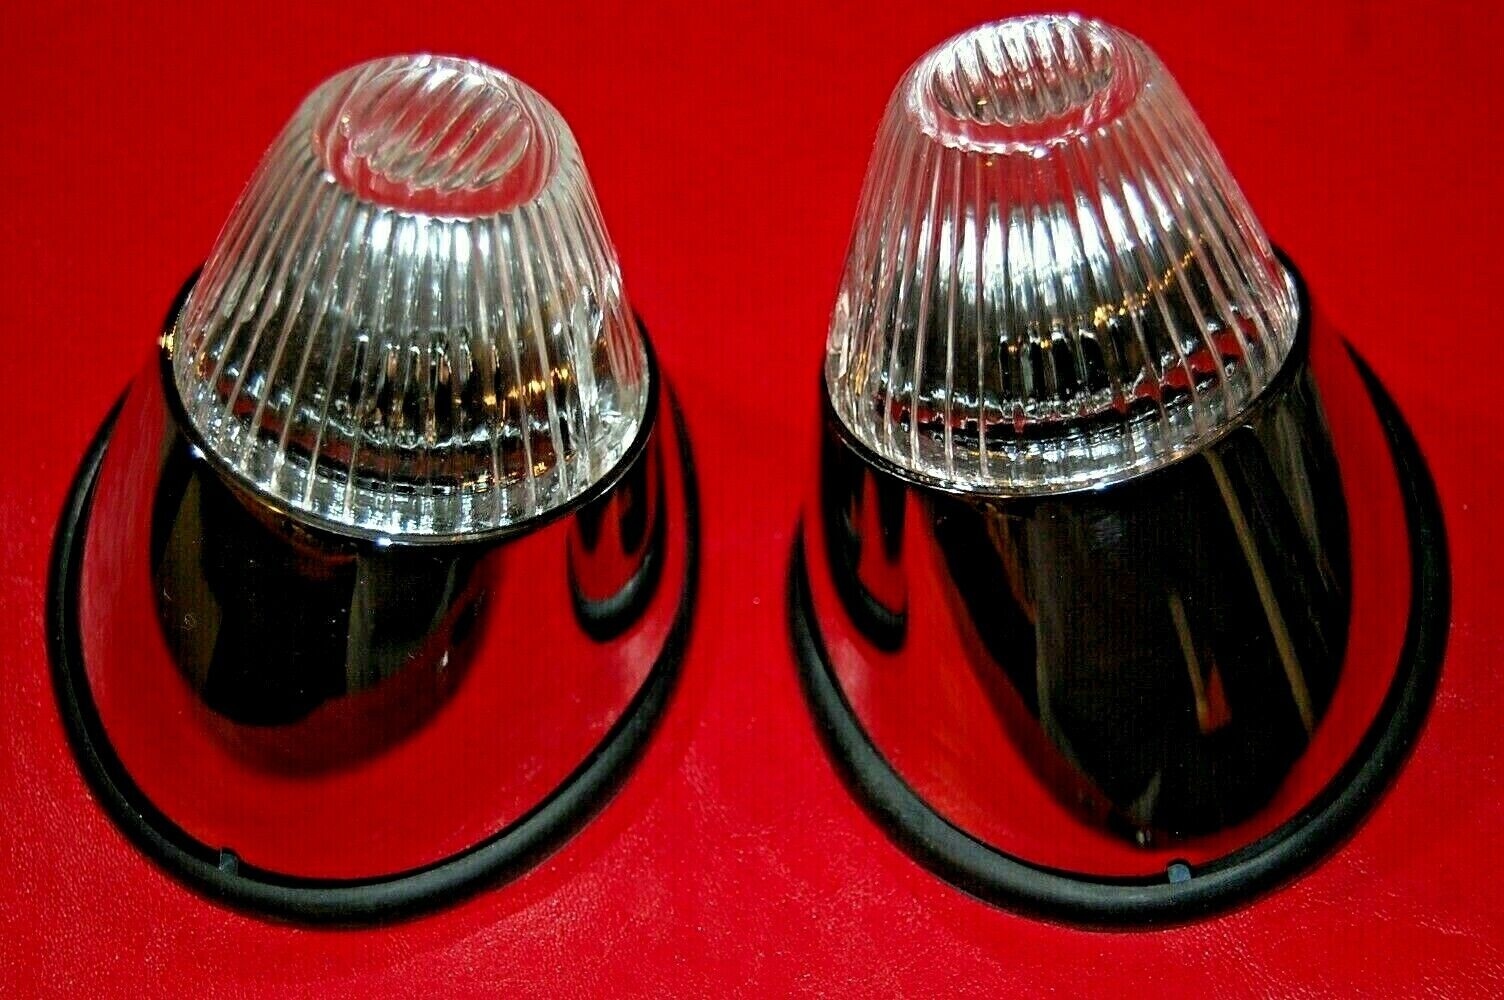 VW KARMANN GHIA FRONT TURN SIGNAL LIGHTS, COMPLETE KIT, ALL CLEAR, ALL YEARS